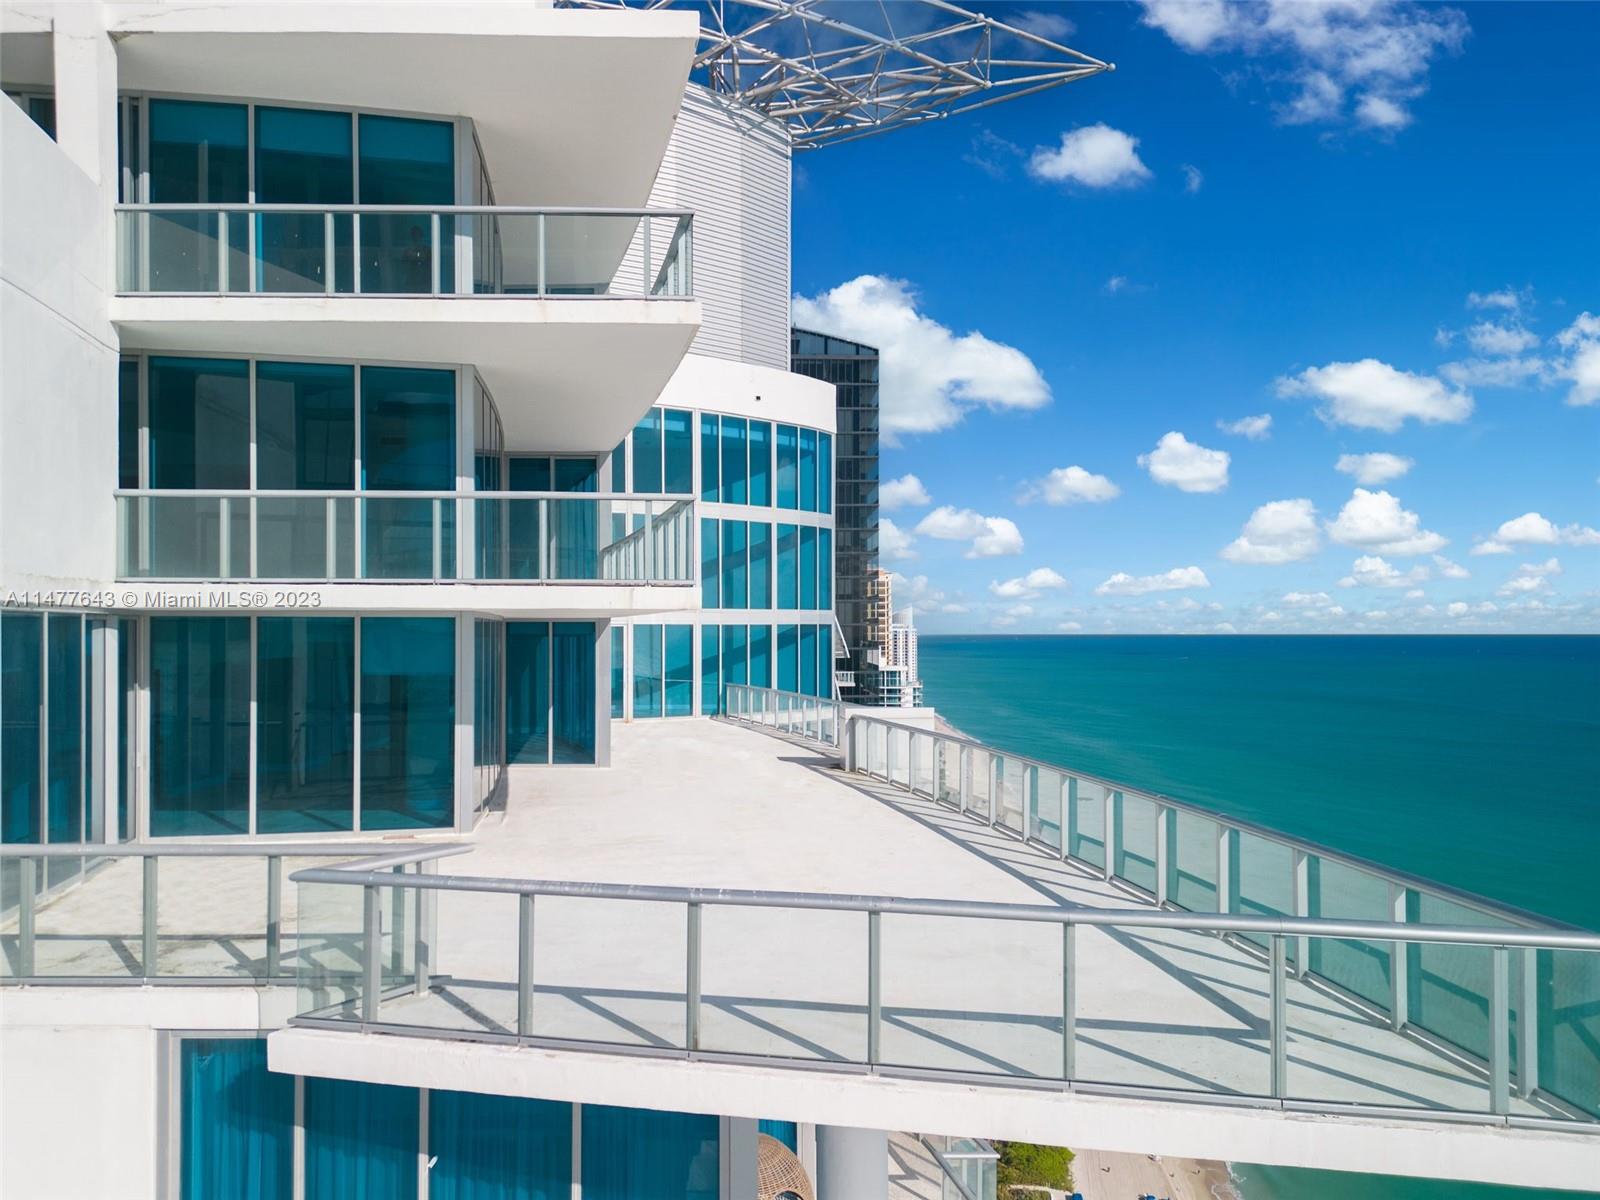 Secret sanctuary —a one-of-a-kind, 14,000 sq ft Tri-Level Penthouse. Revel in unobstructed, panoramic 180-degree vistas of the Atlantic Ocean and Intracoastal. Nestled on the Southeast corner of Jade Beach, this three-story Penthouse boasts five-bedrooms and six-and-a-half bathrooms. Each room offers spectacular floor-to-ceiling views. Delight in approximately 5000 sq ft of balconies and terraces, ensuring each bedroom has access to a private outdoor space. Ascend with ease using the private elevator within the unit. And for the ultimate relaxation, bask in the views from the private jacuzzi. The Penthouse will be delivered designer ready with architectural plans.